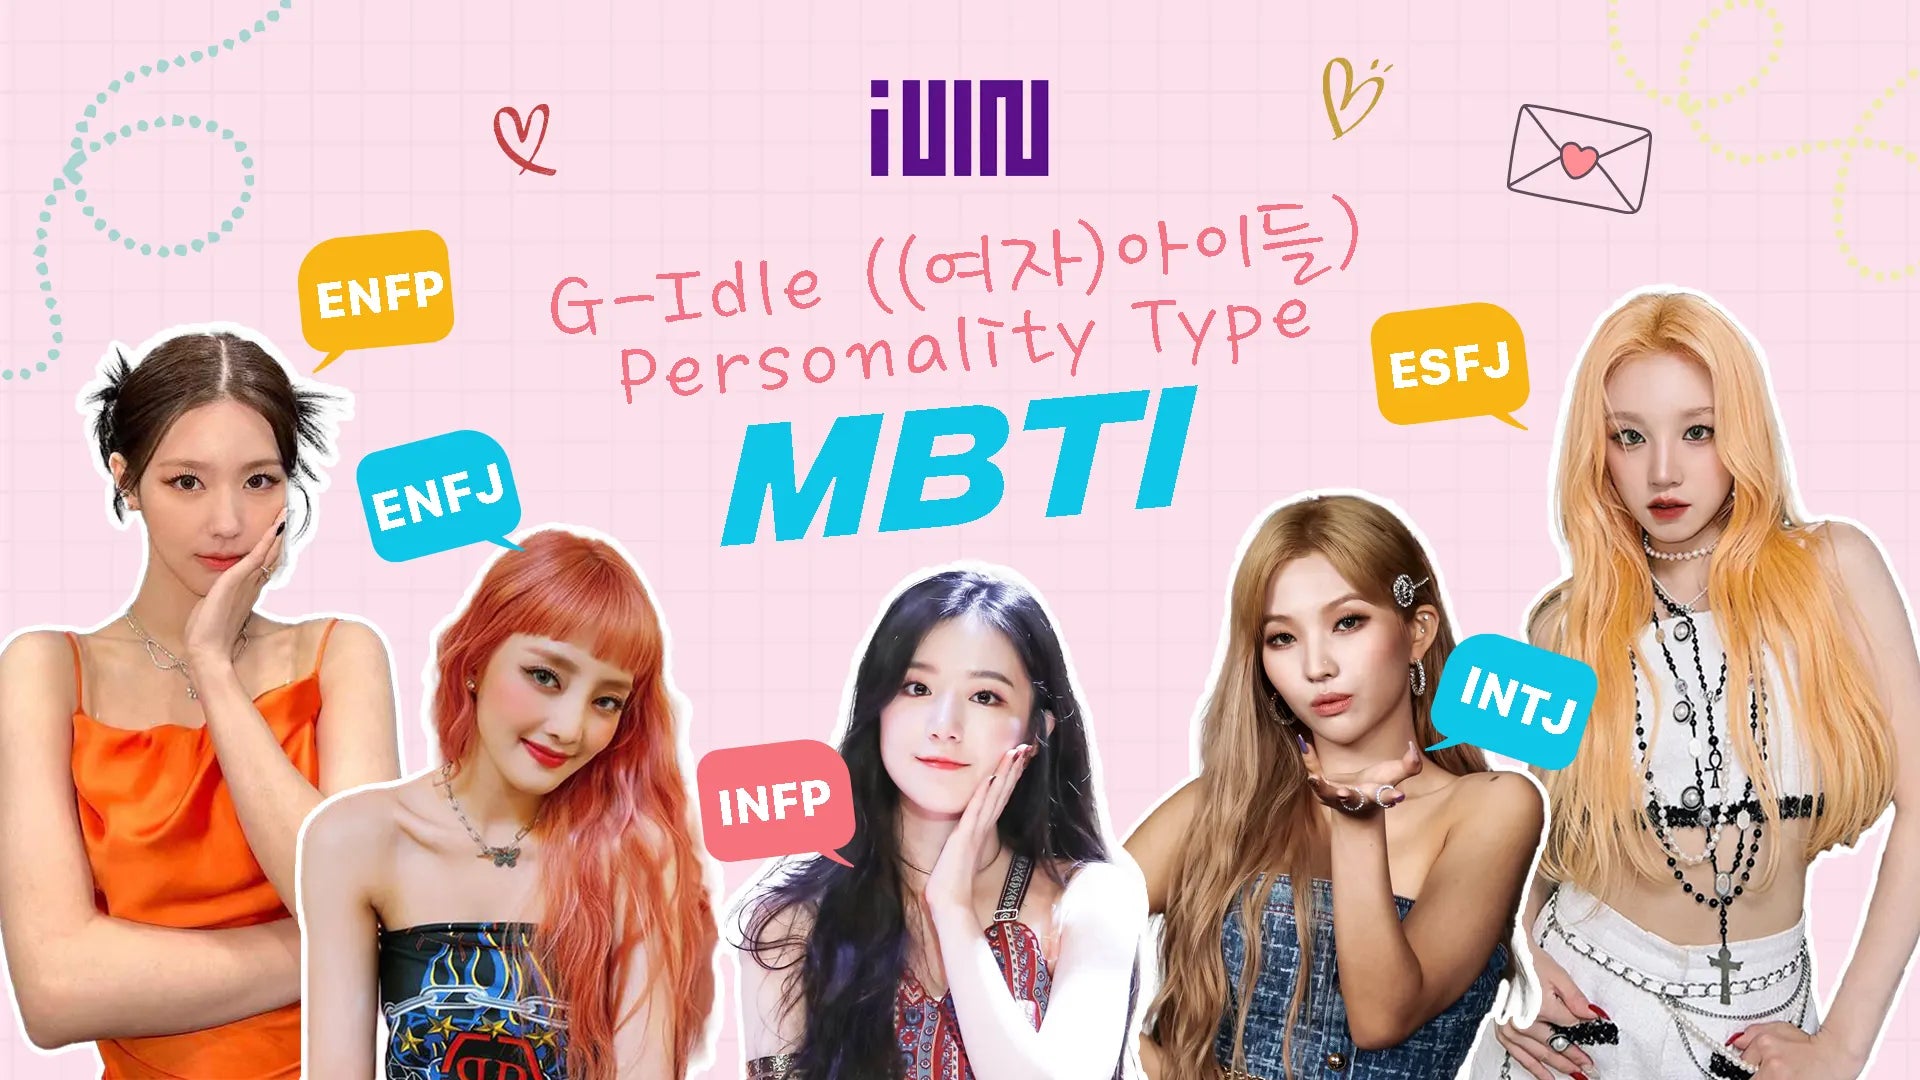 Kpop Idols Who Are INFP (Updated!) - Kpop Profiles